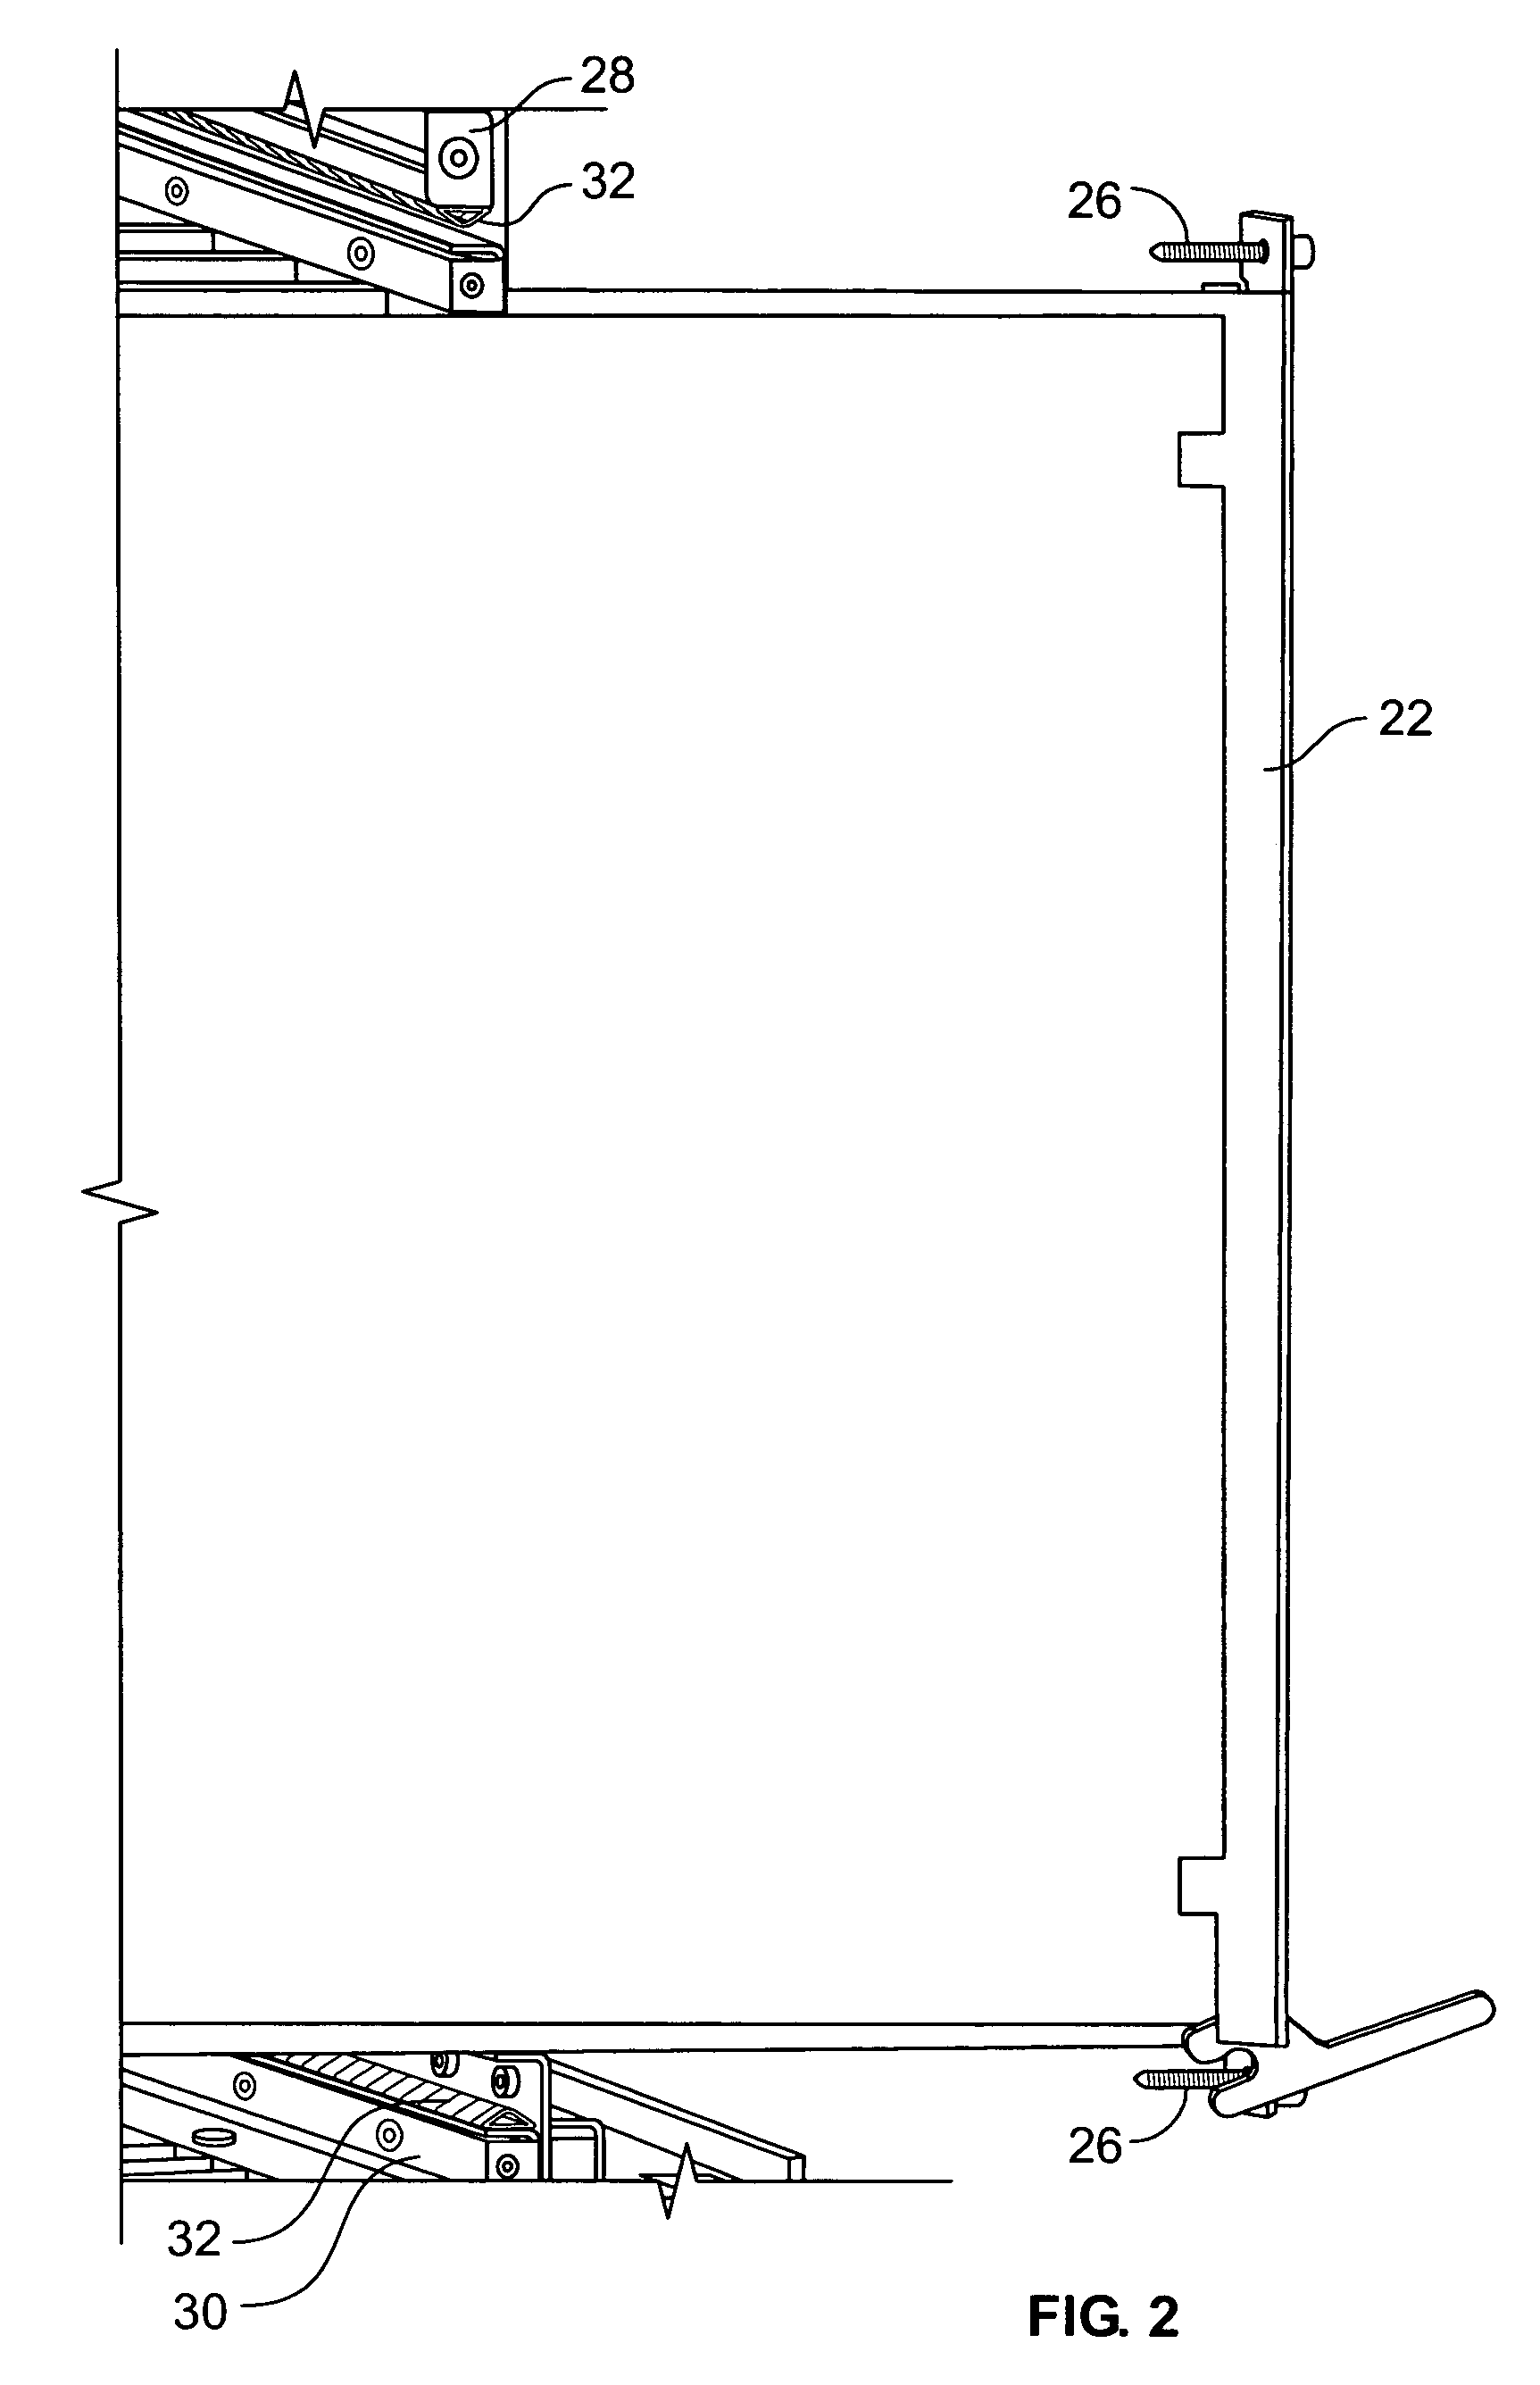 ESD system for grounding electronics within an enclosure